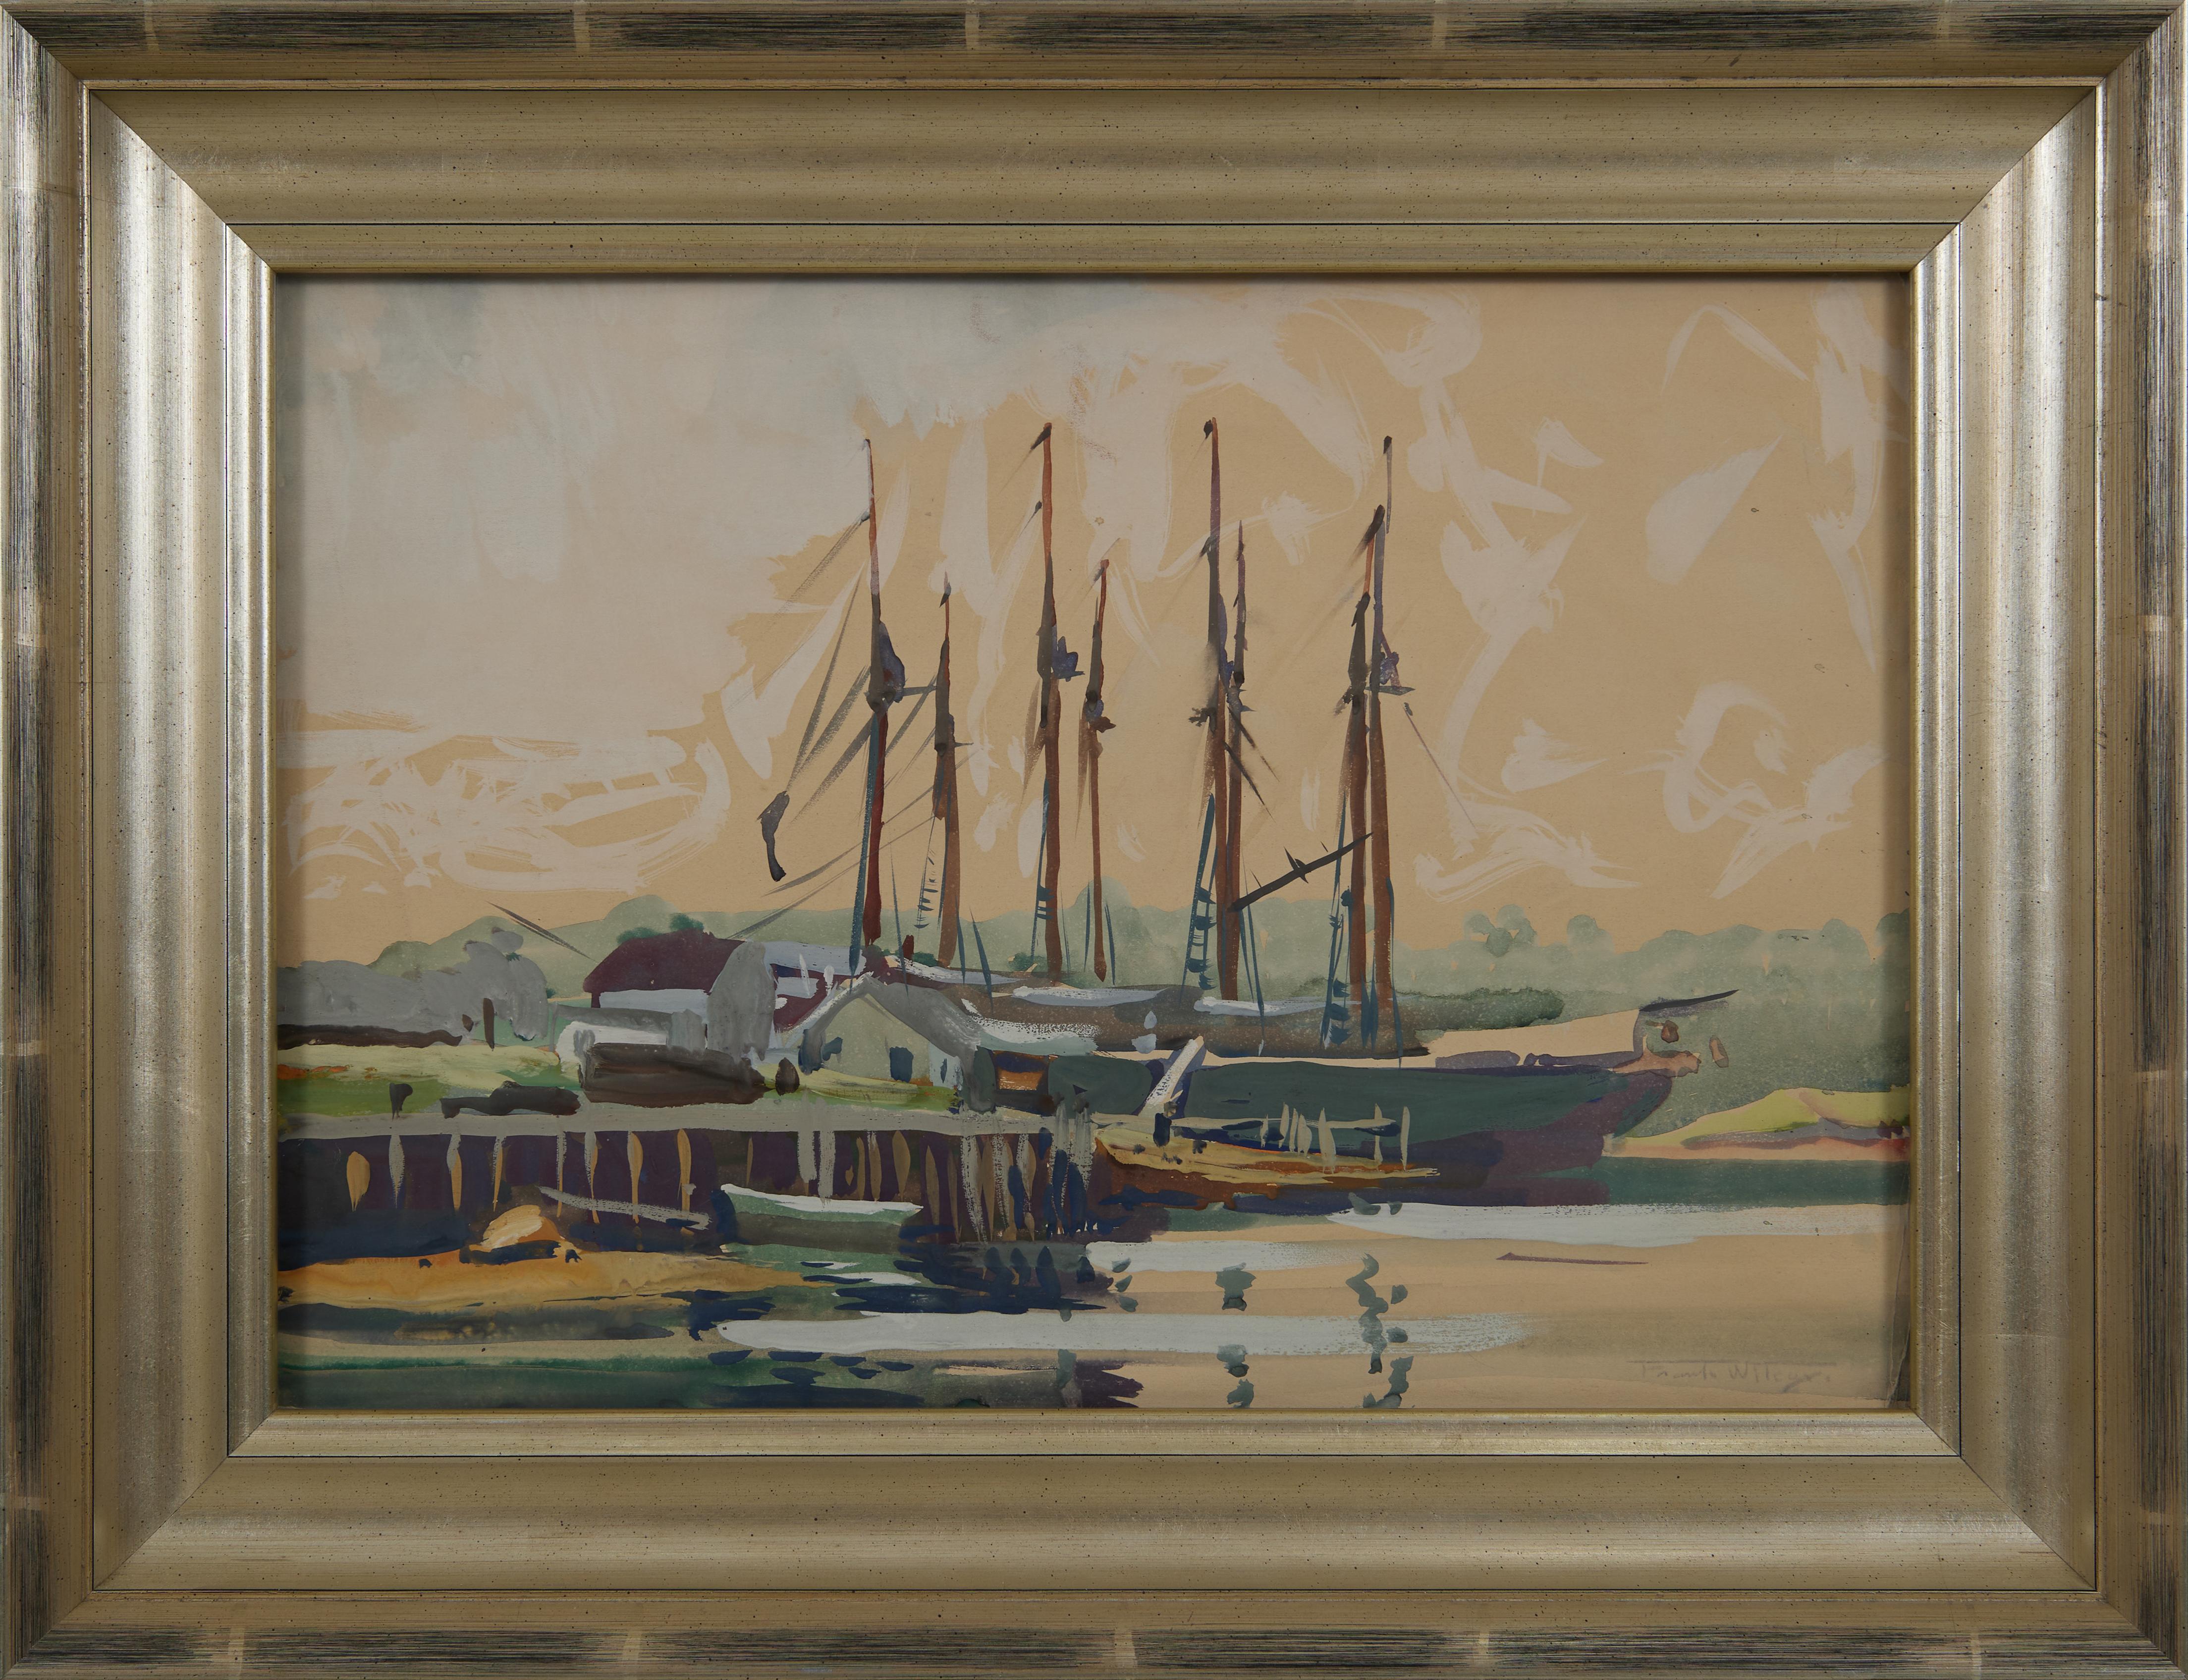 Schooner, Boothbay Harbor, Maine, Early 20th Century Seascape Watercolor - Painting by Frank Wilcox